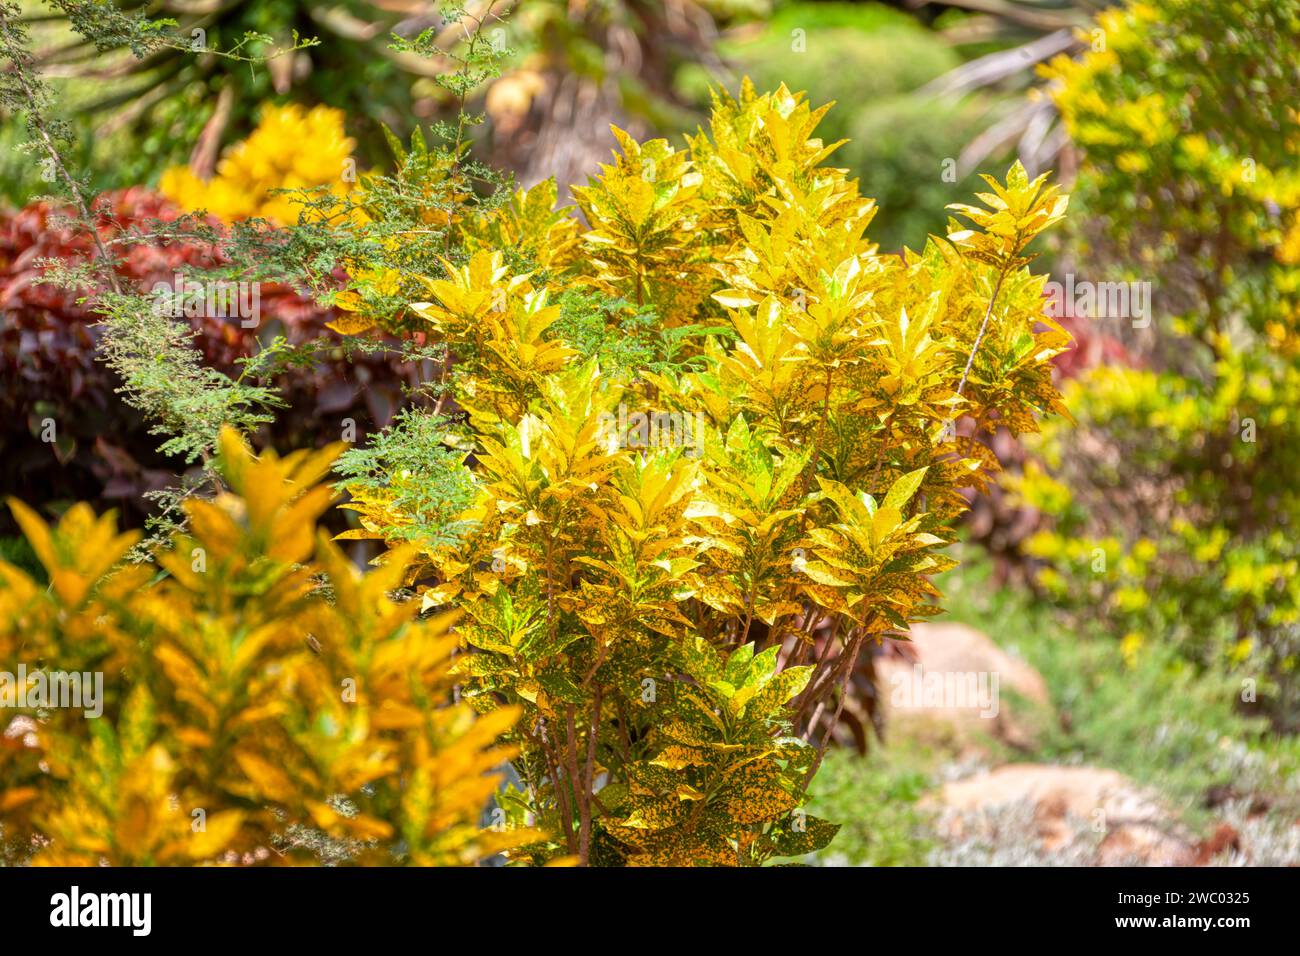 Croton plant that grows in Africa, decorative for garden and parks Stock Photo